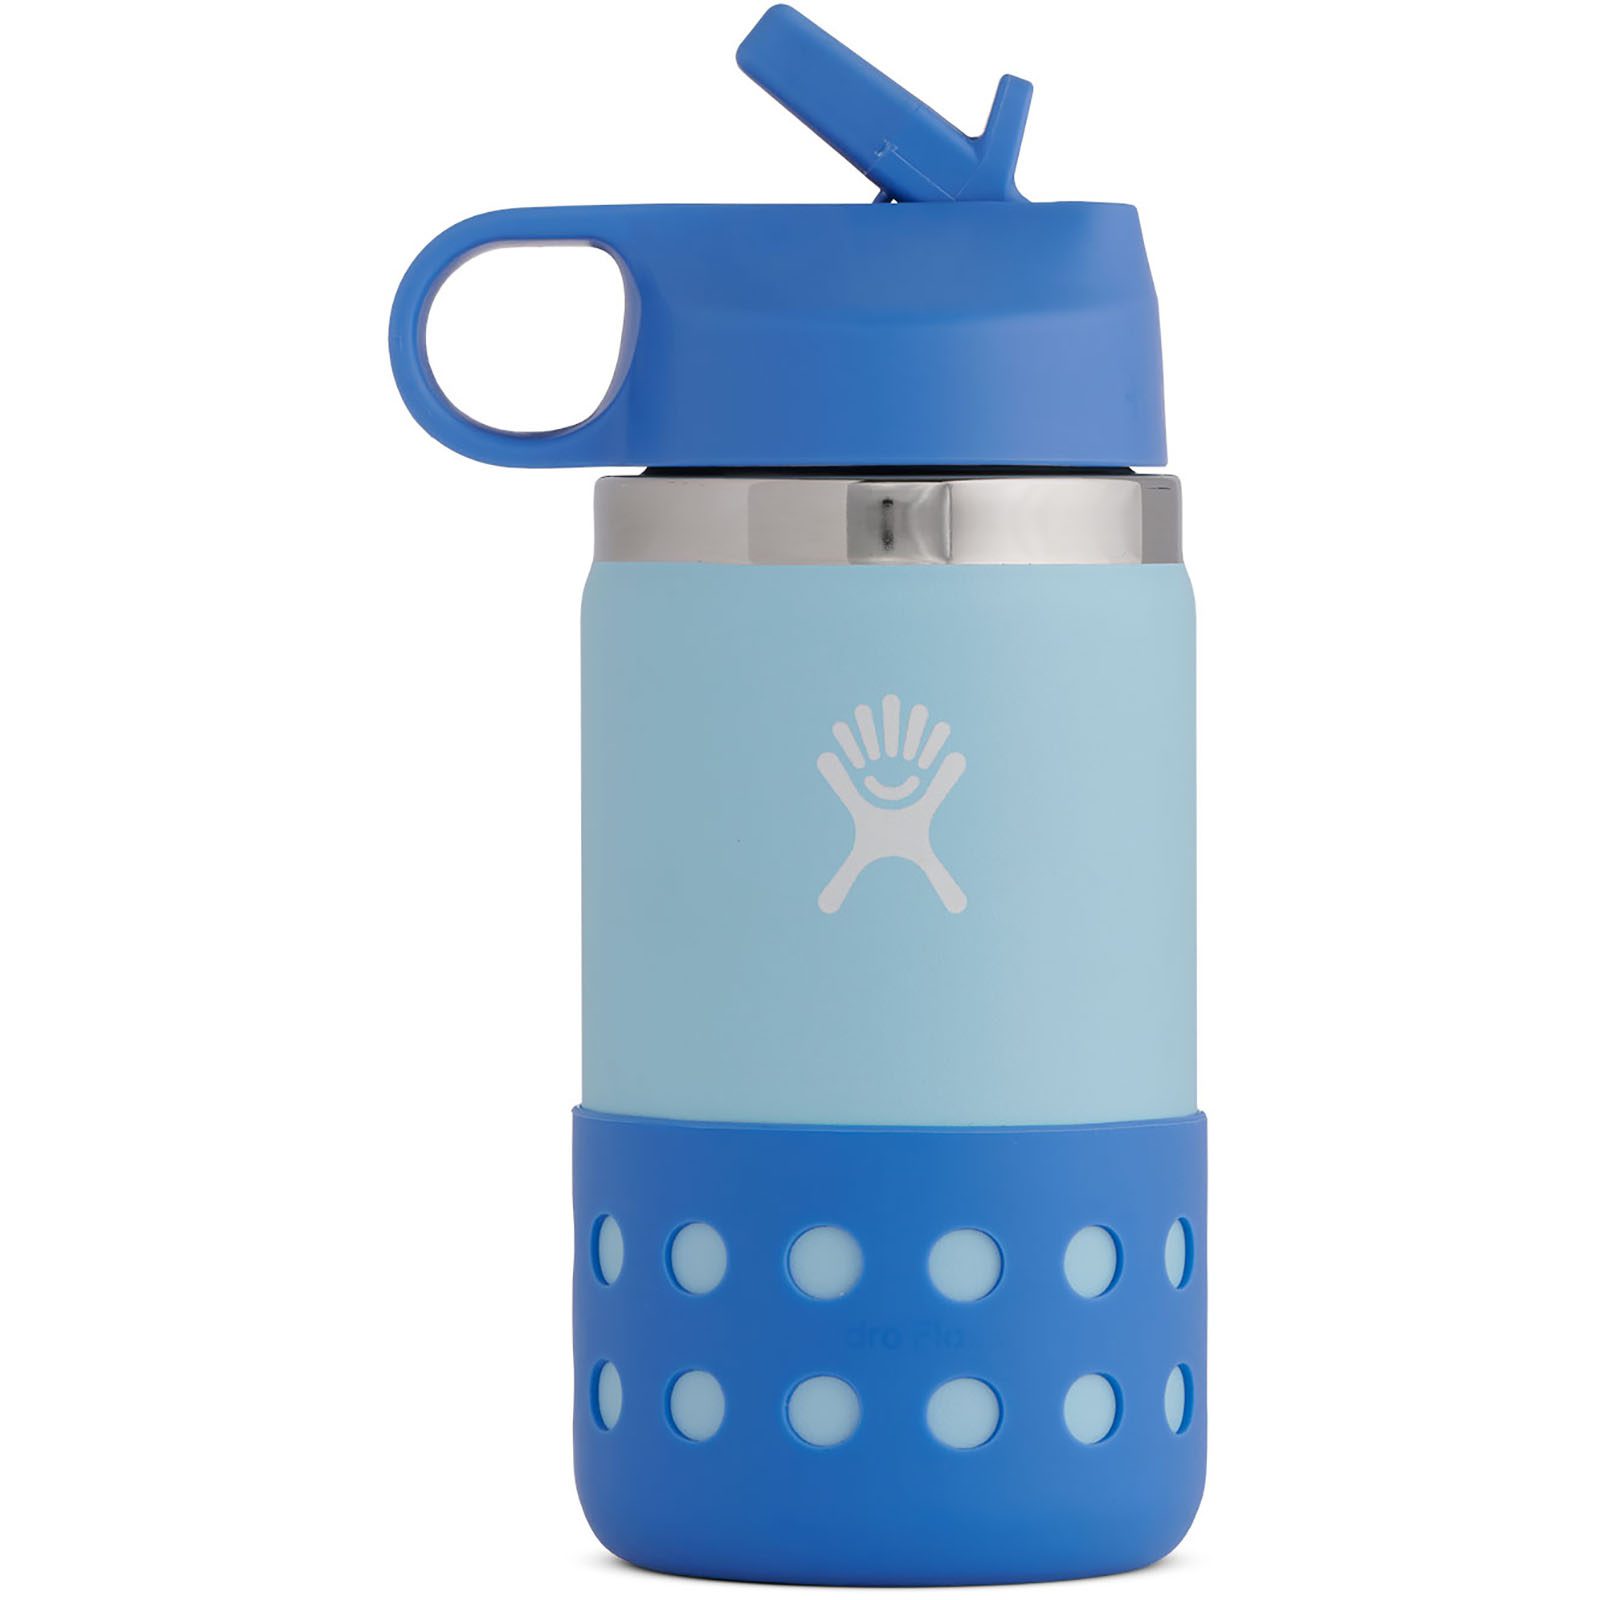 https://borregooutfitters.com/wp-content/uploads/Hydro-Flask-Hydro-Flask-Kids-12-oz-Wide-Mouth-Bottle-Ice-Cove-Borrego-Outfitters-scaled.jpg